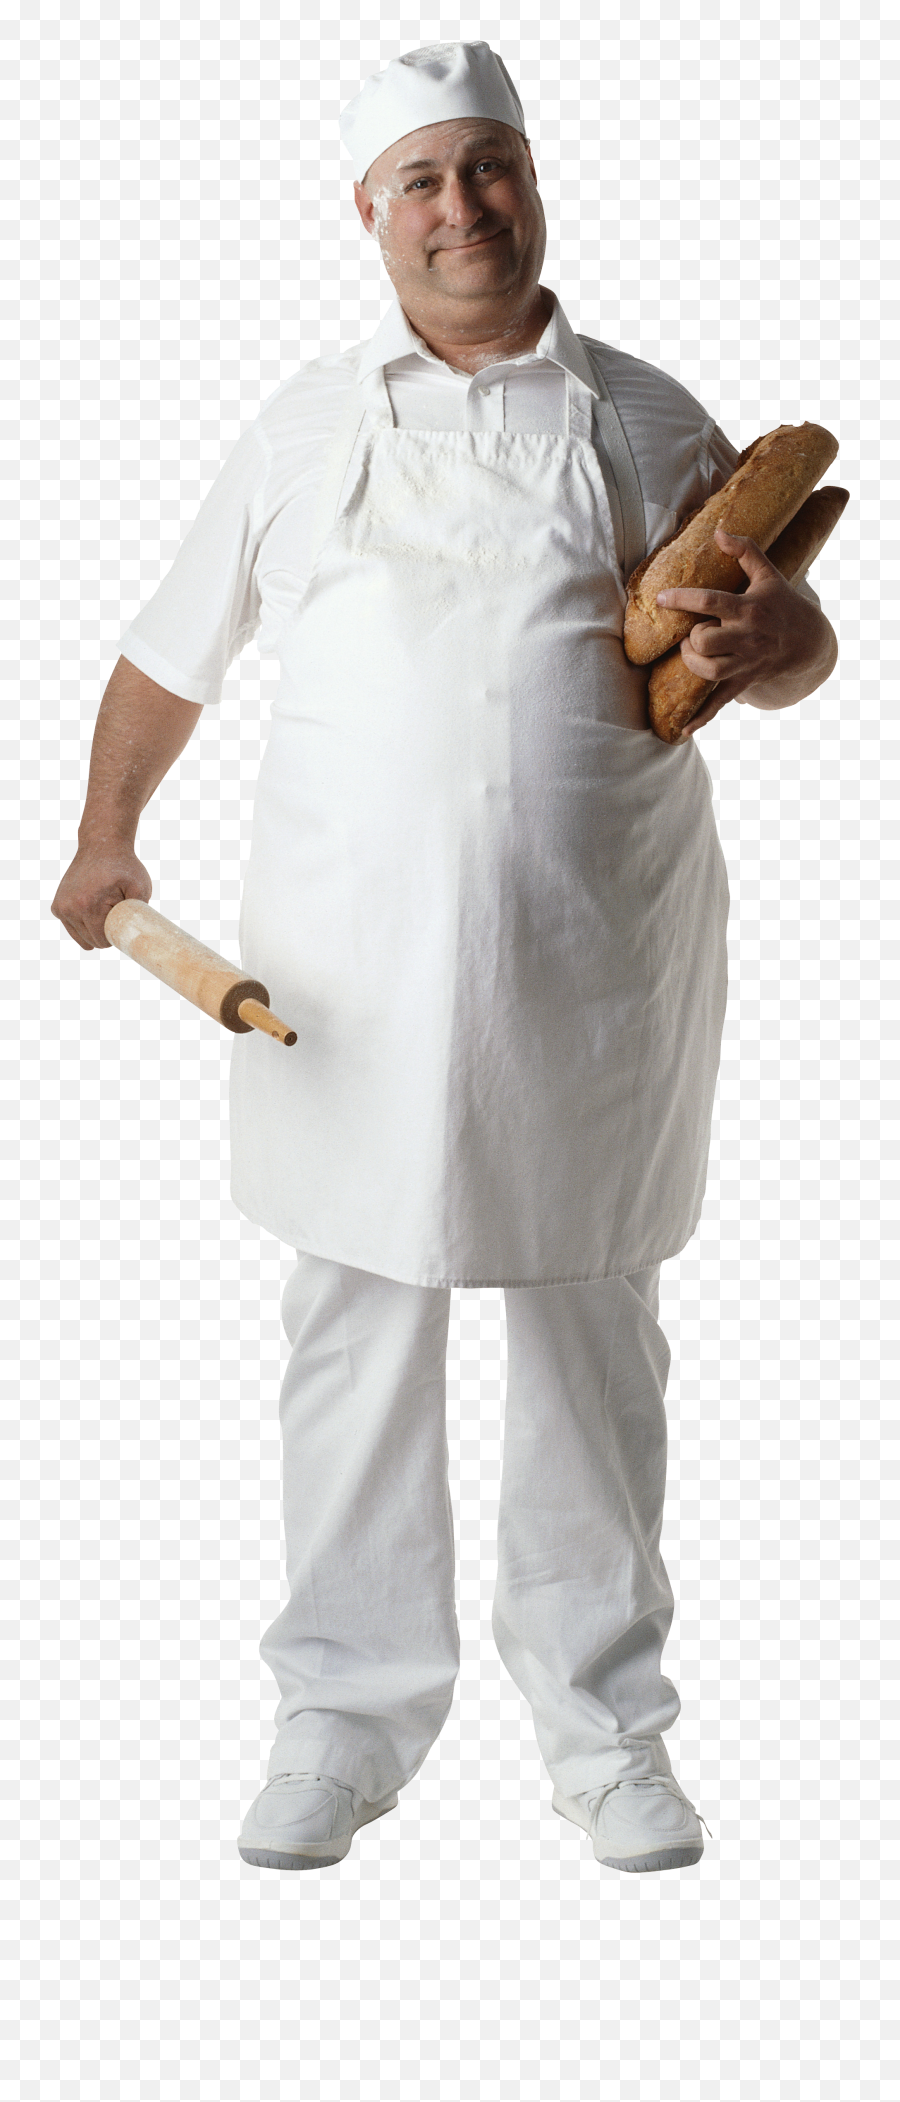 Download Chef Png Image For Free - Happy Emoji,Chef Png